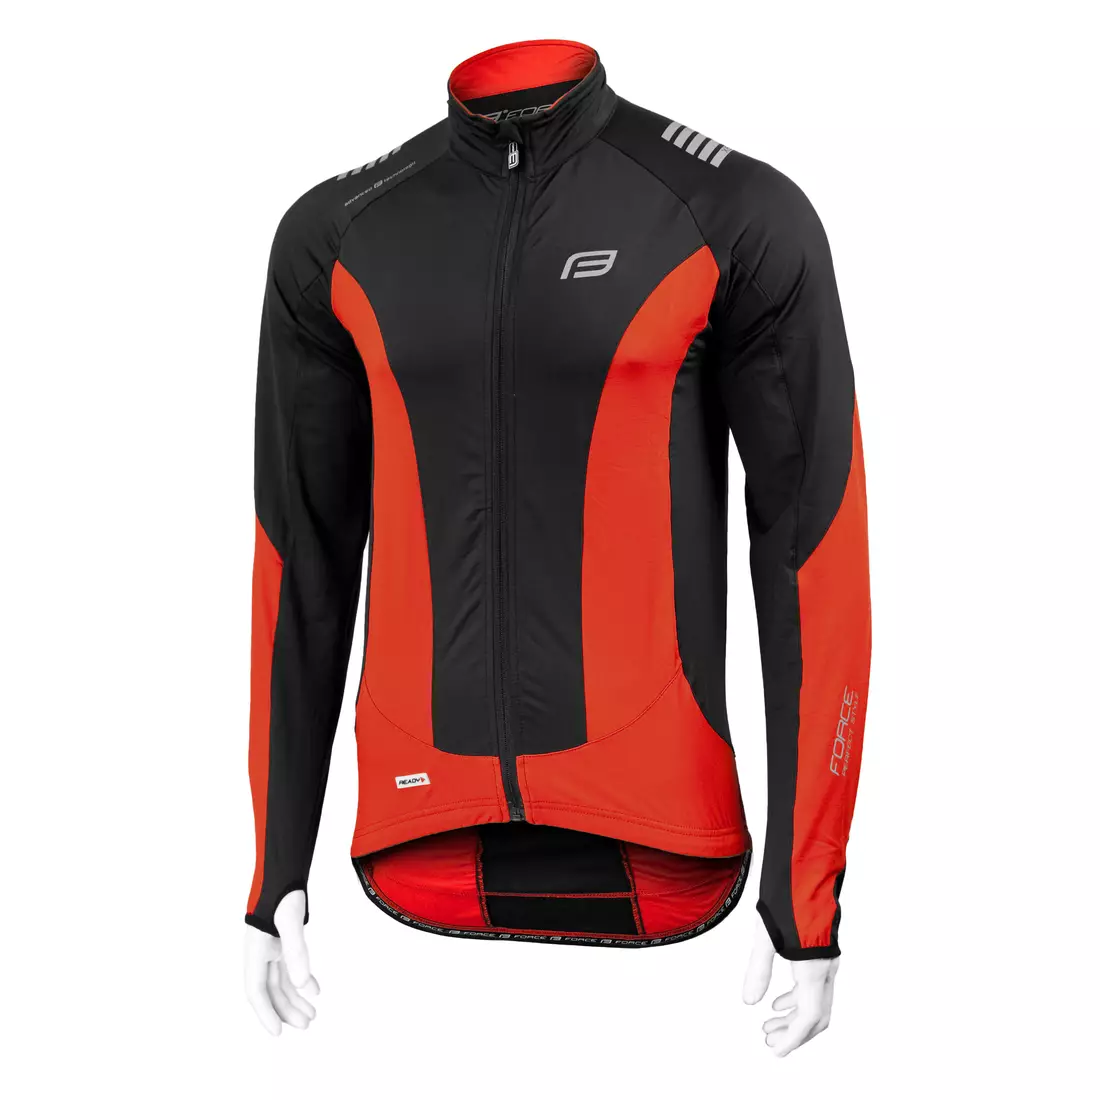 FORCE X68 - 89985 - man's insulated bicycle sweatshirt black-red